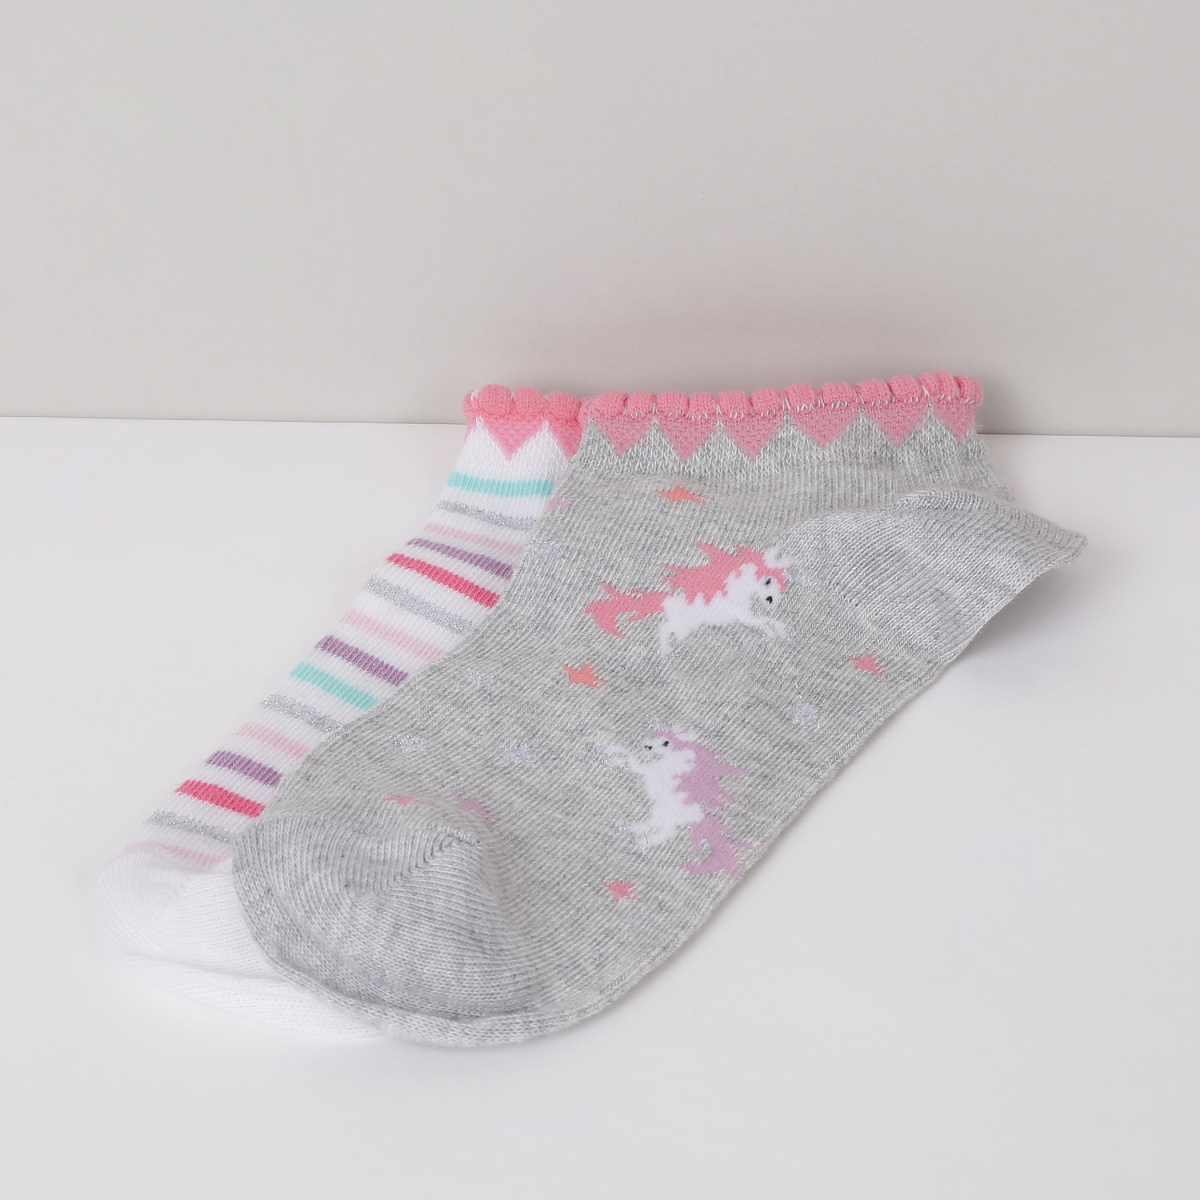 MAX Textured Socks - Pack of 2